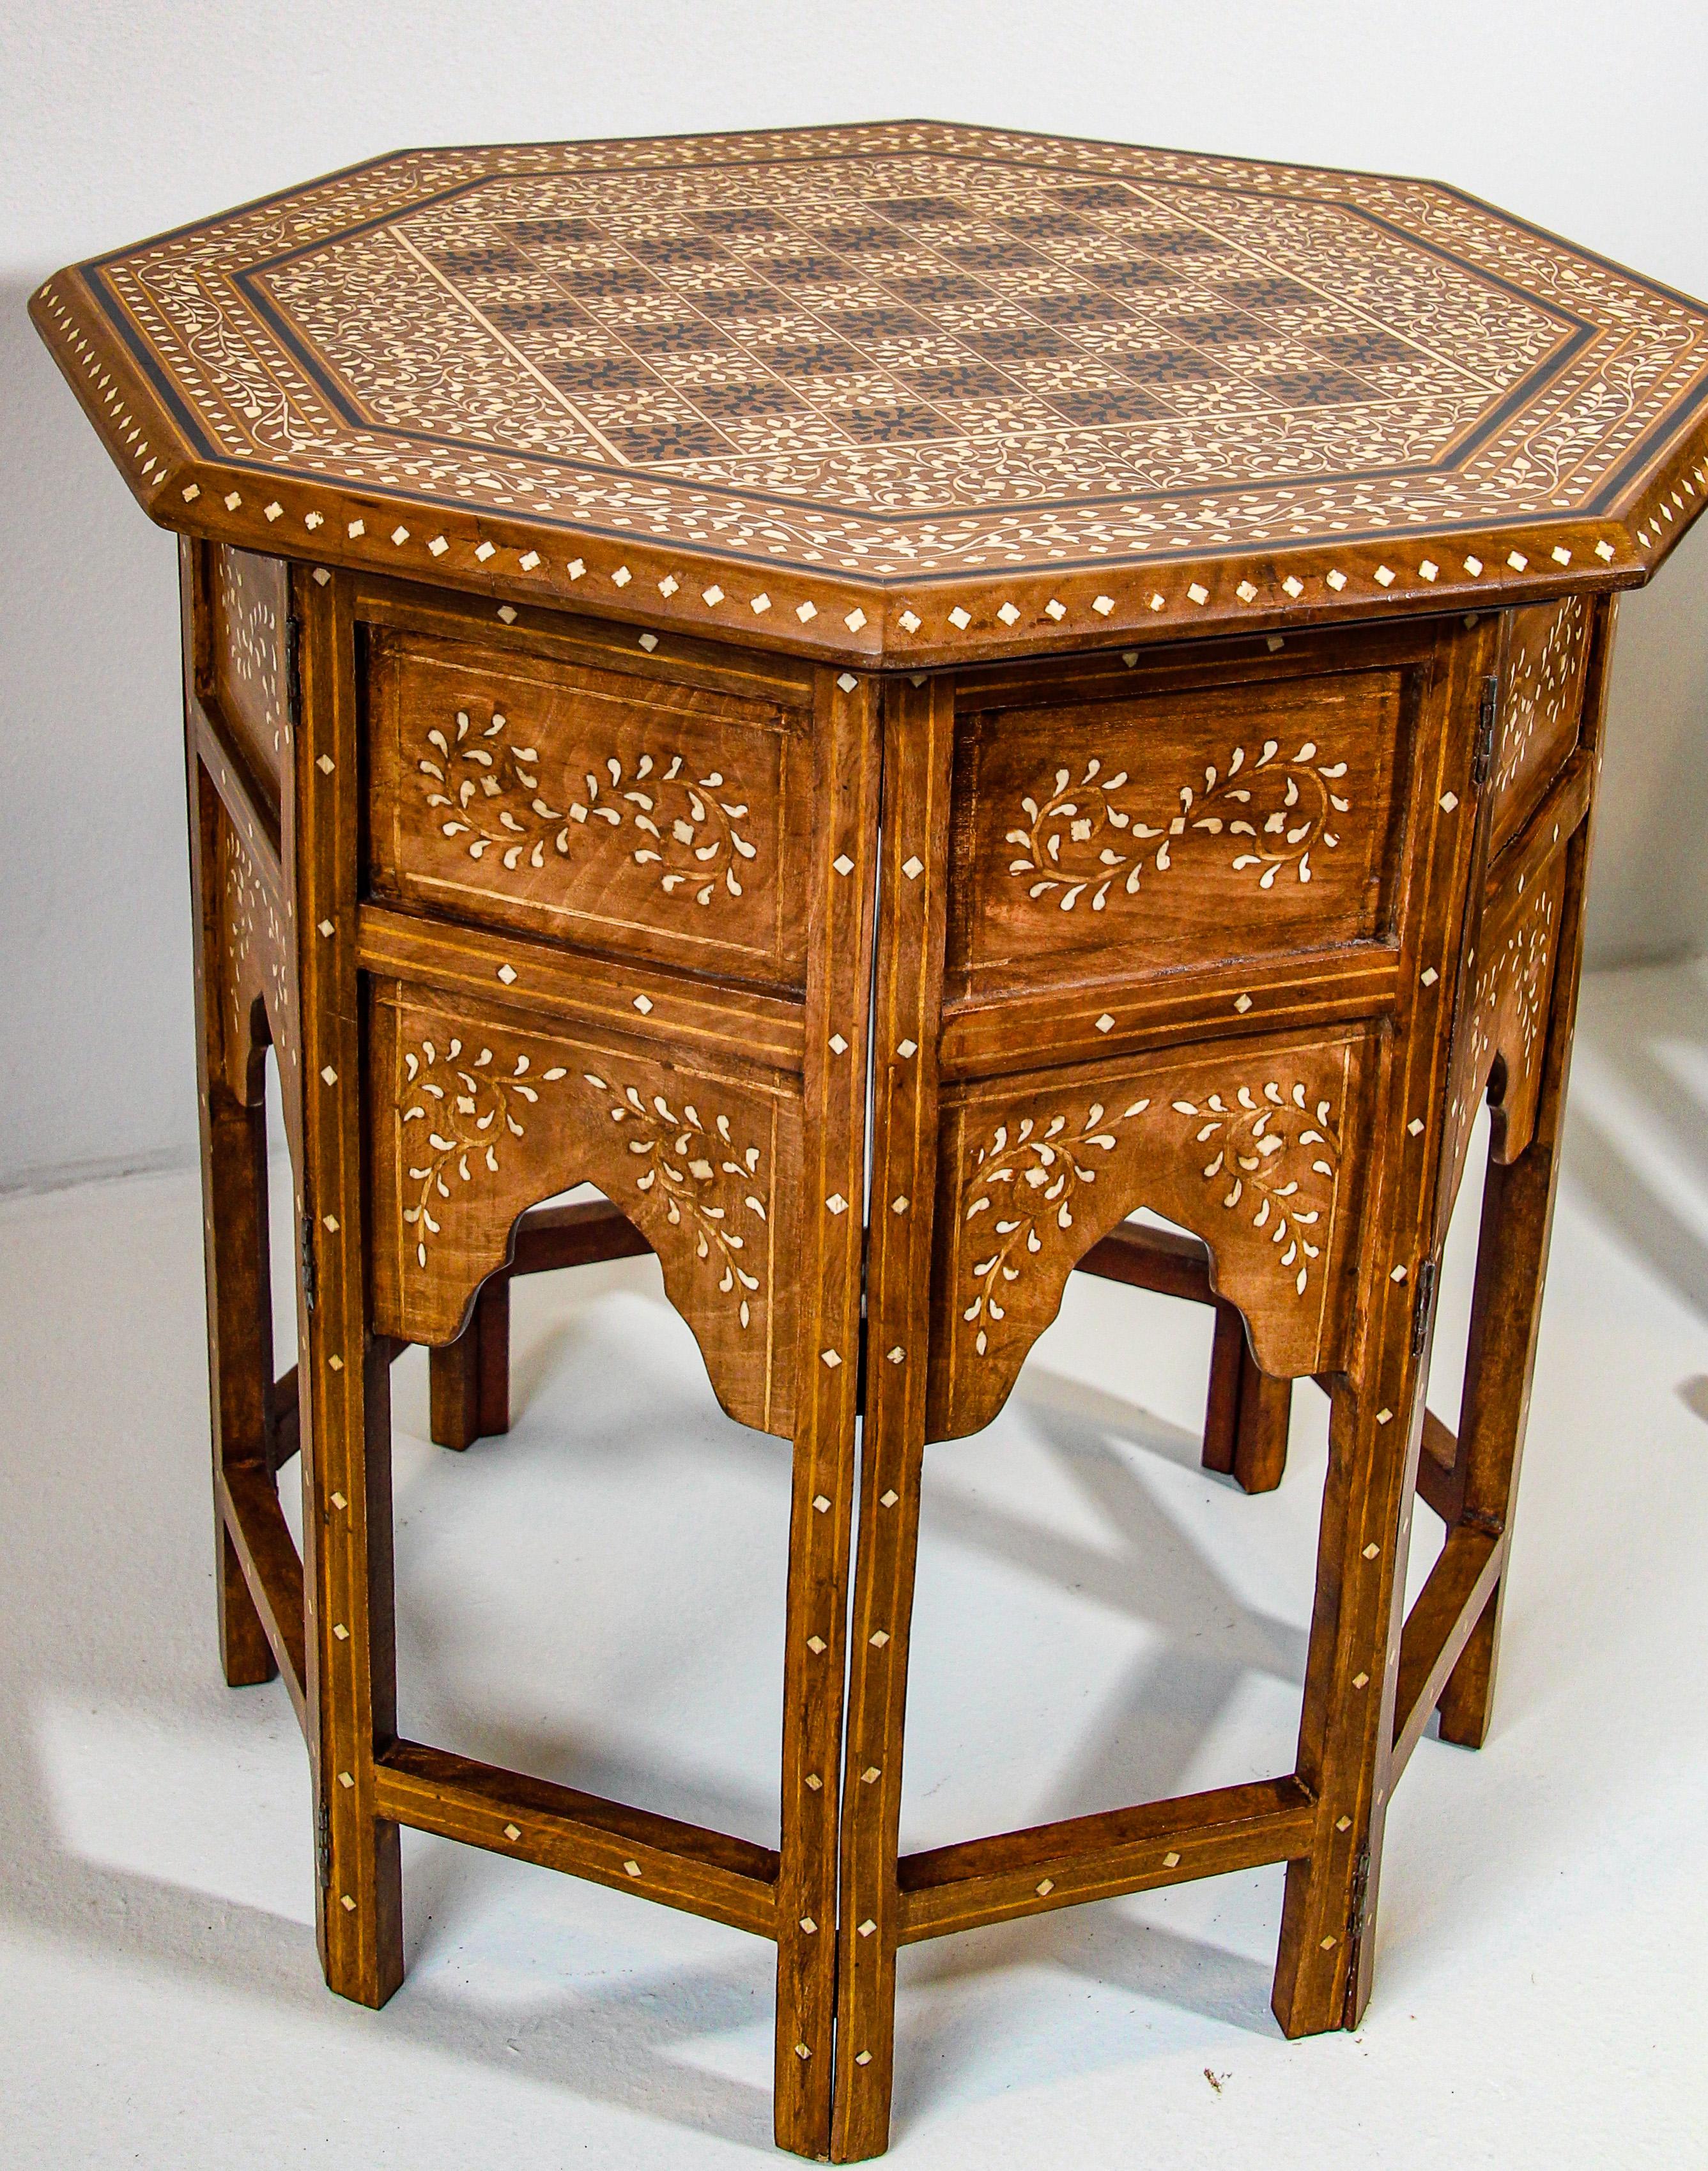 Anglo-Indian Octagonal Mughal Moorish Chess Game Table with Inlay India 3